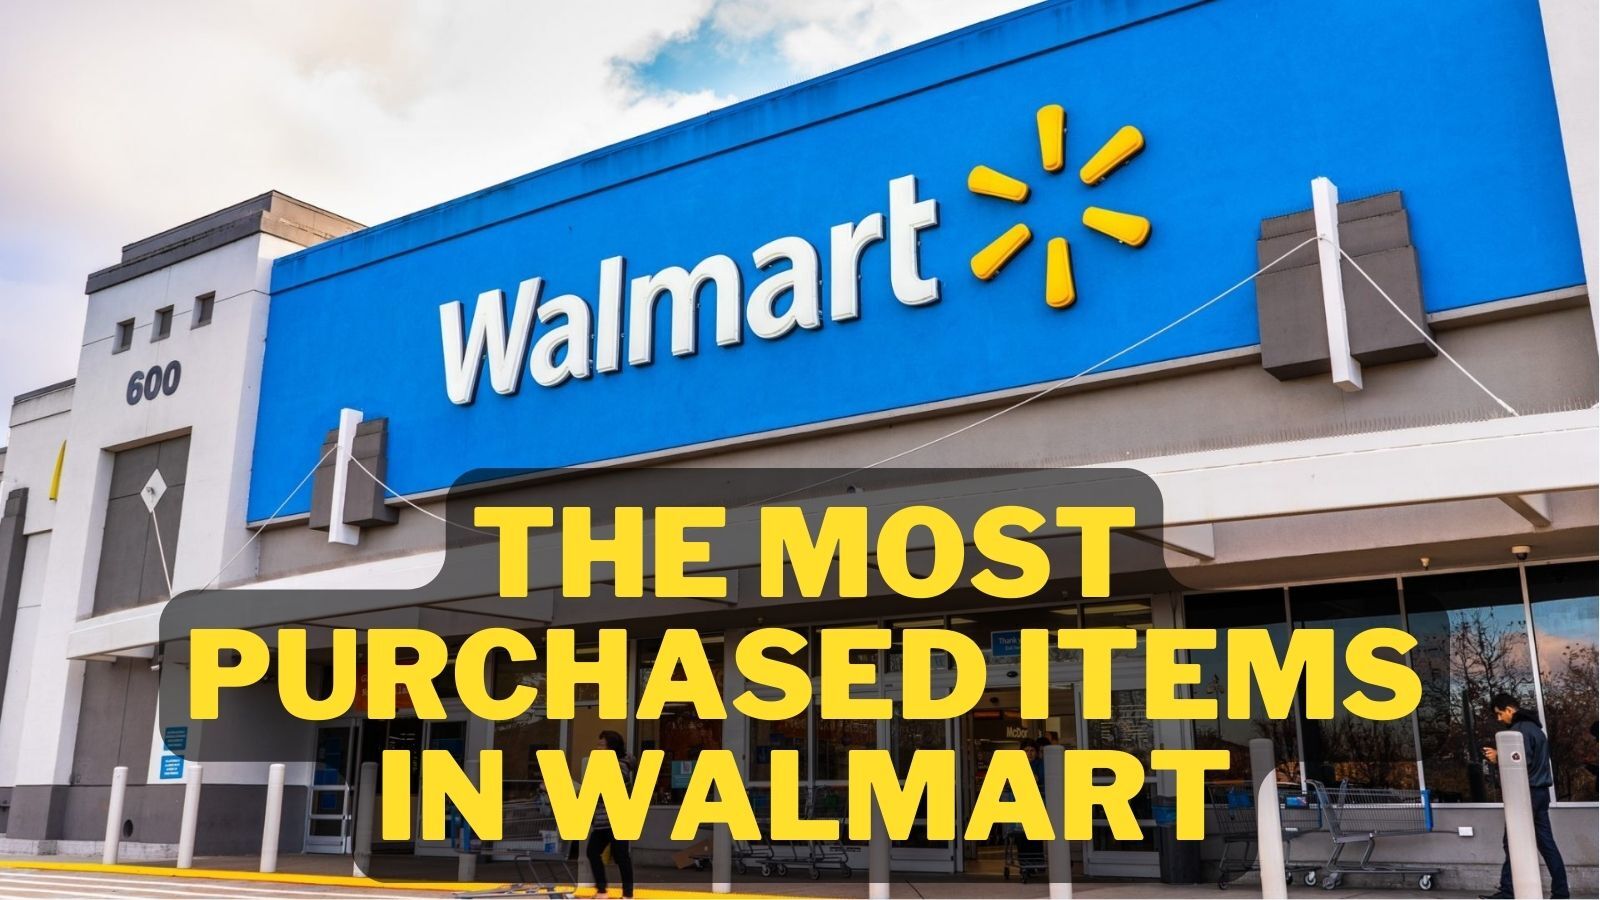 The Most Purchased Items in Walmart: The Answer May Surprise You!